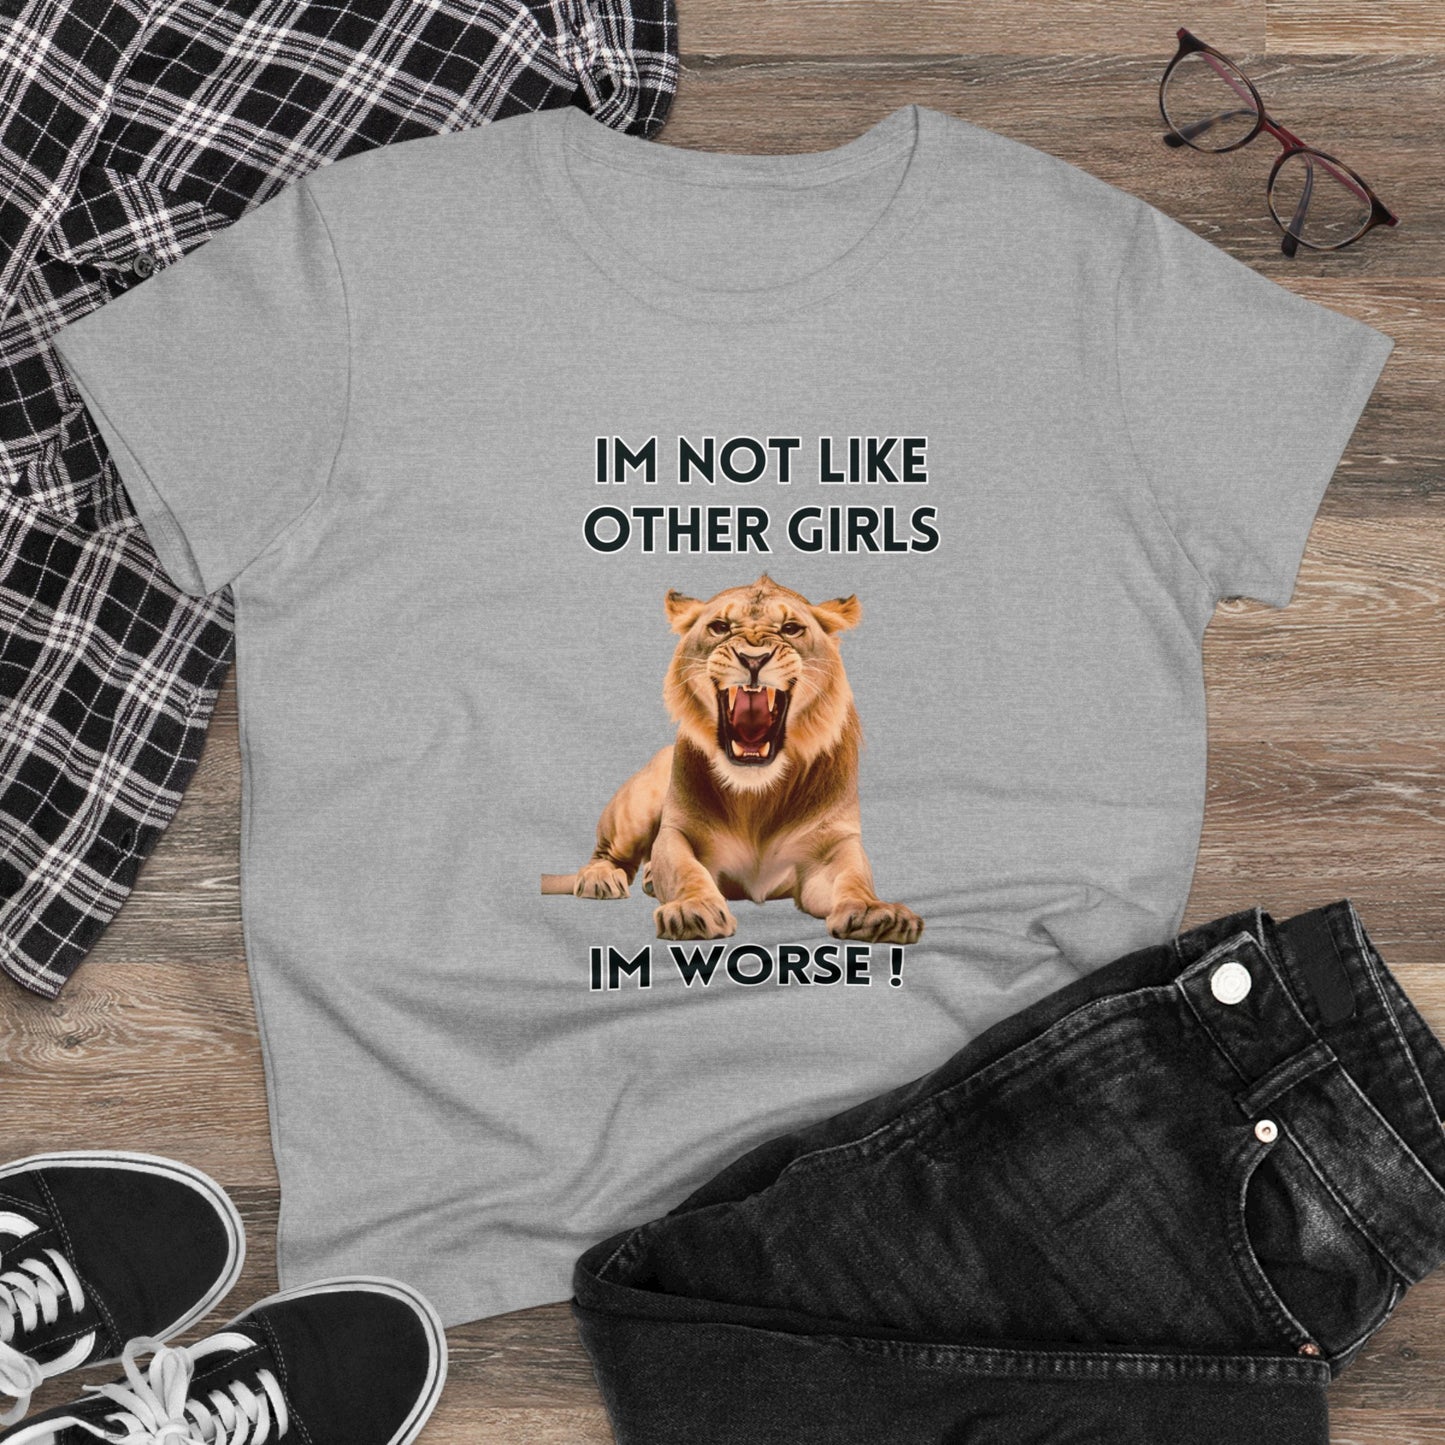 Angry Lion Funny T-Shirt - I'm Not Like Other Girls T-Shirt Sport Grey S 